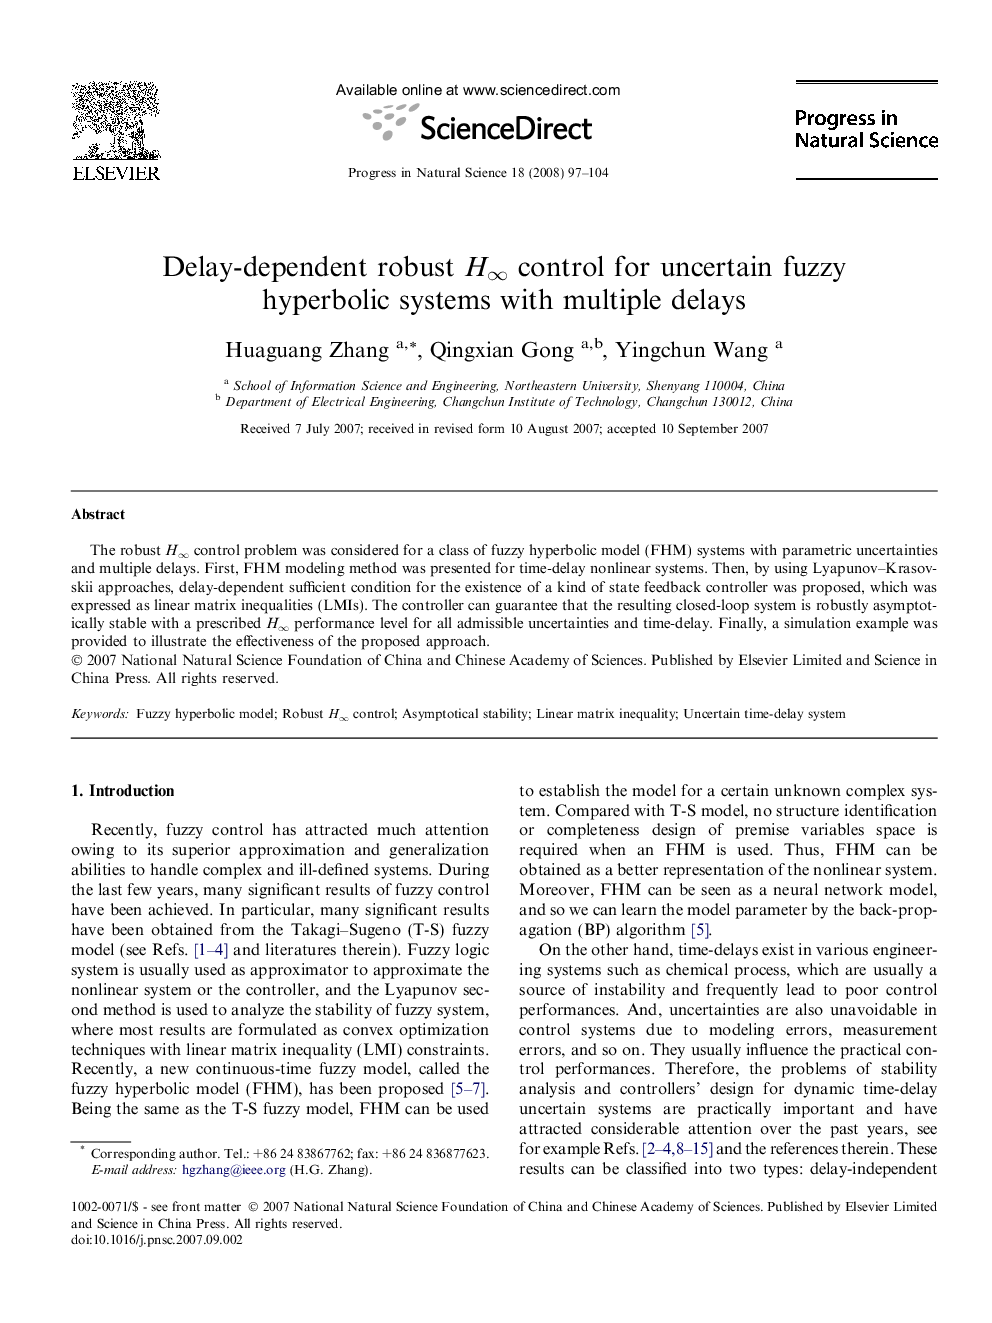 Delay-dependent robust H∞ control for uncertain fuzzy hyperbolic systems with multiple delays